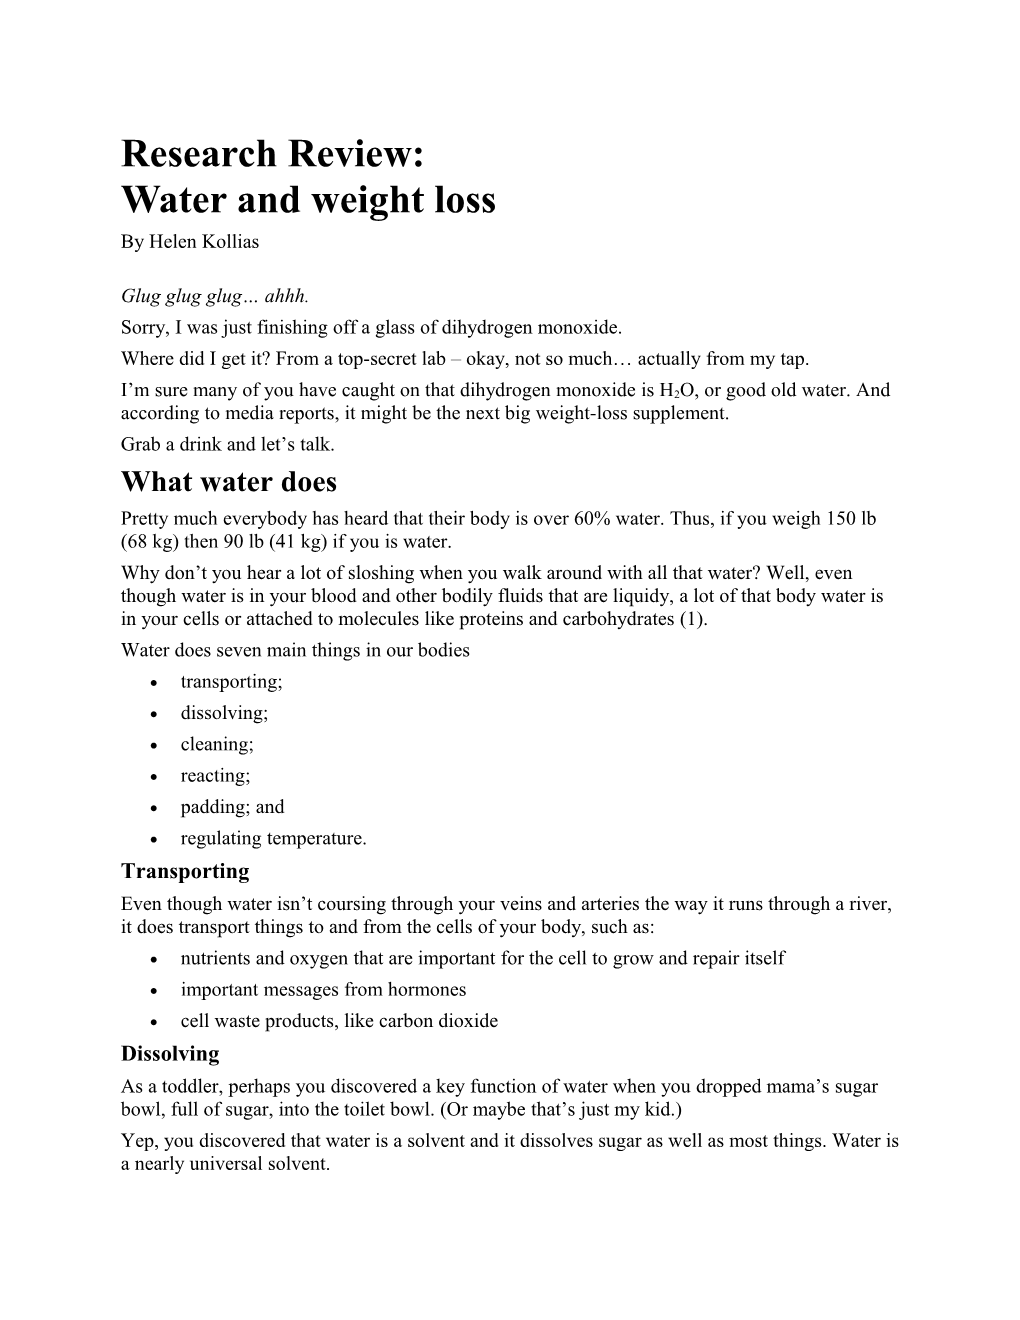 Research Review: Water and Weight Loss